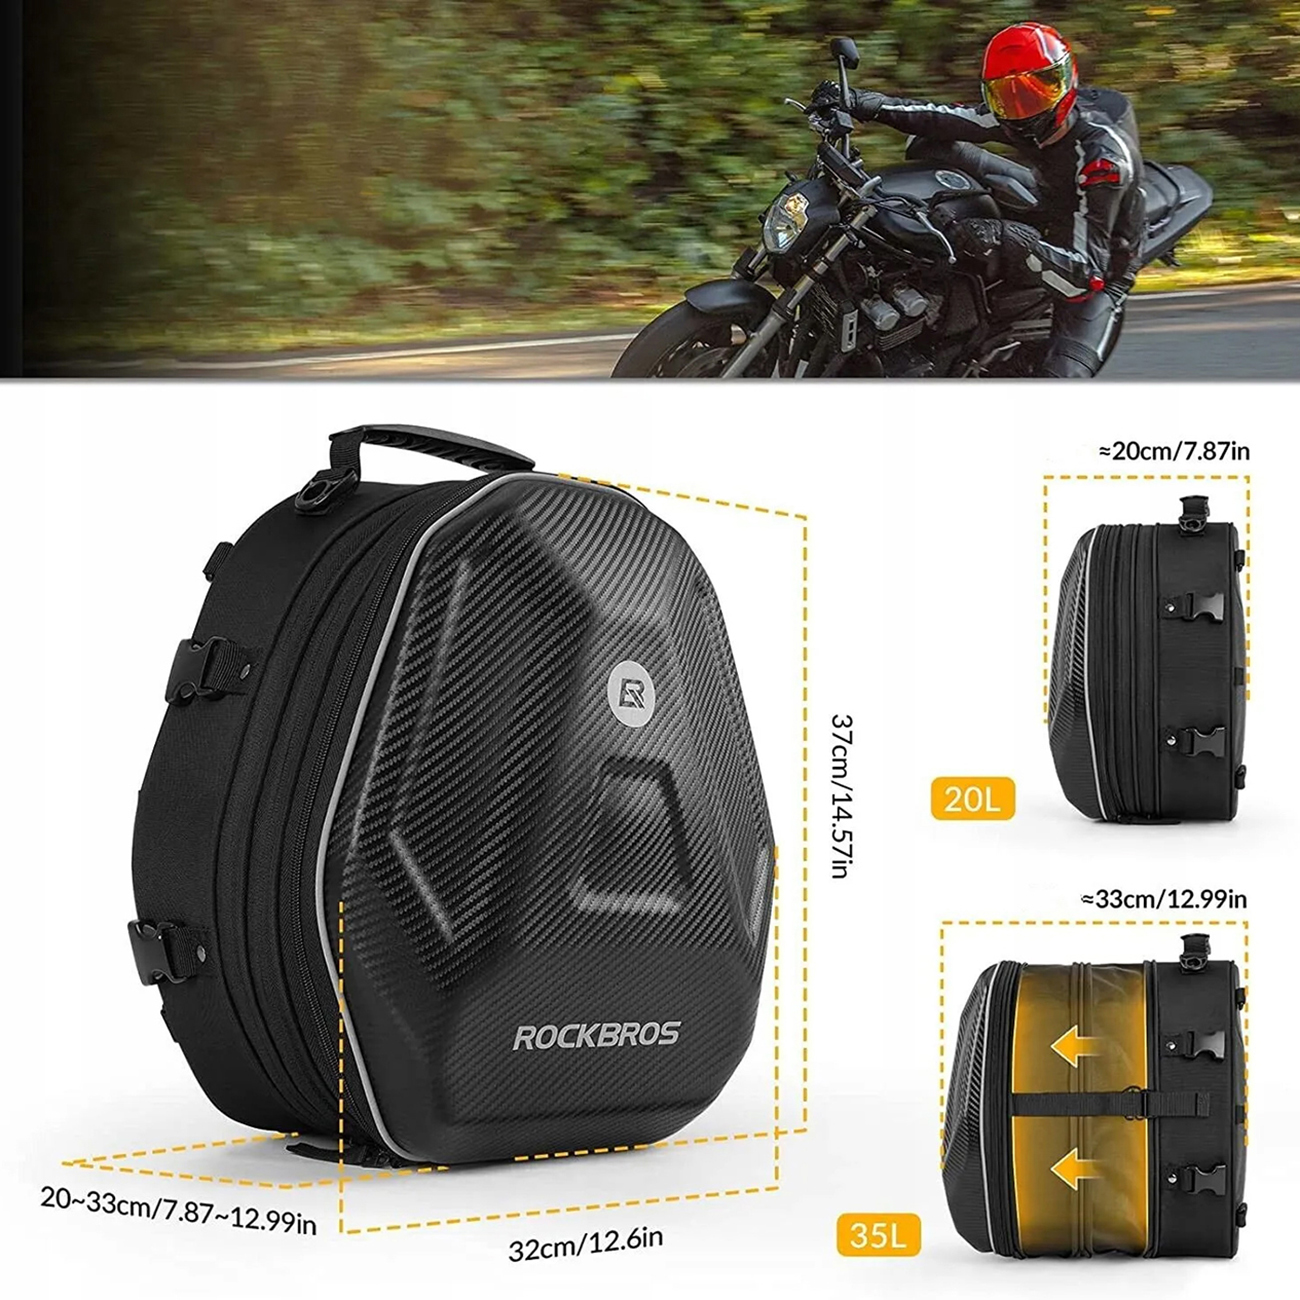 Showing the dimensions and capacity of the Rockbros 30140026001 motorcycle bag